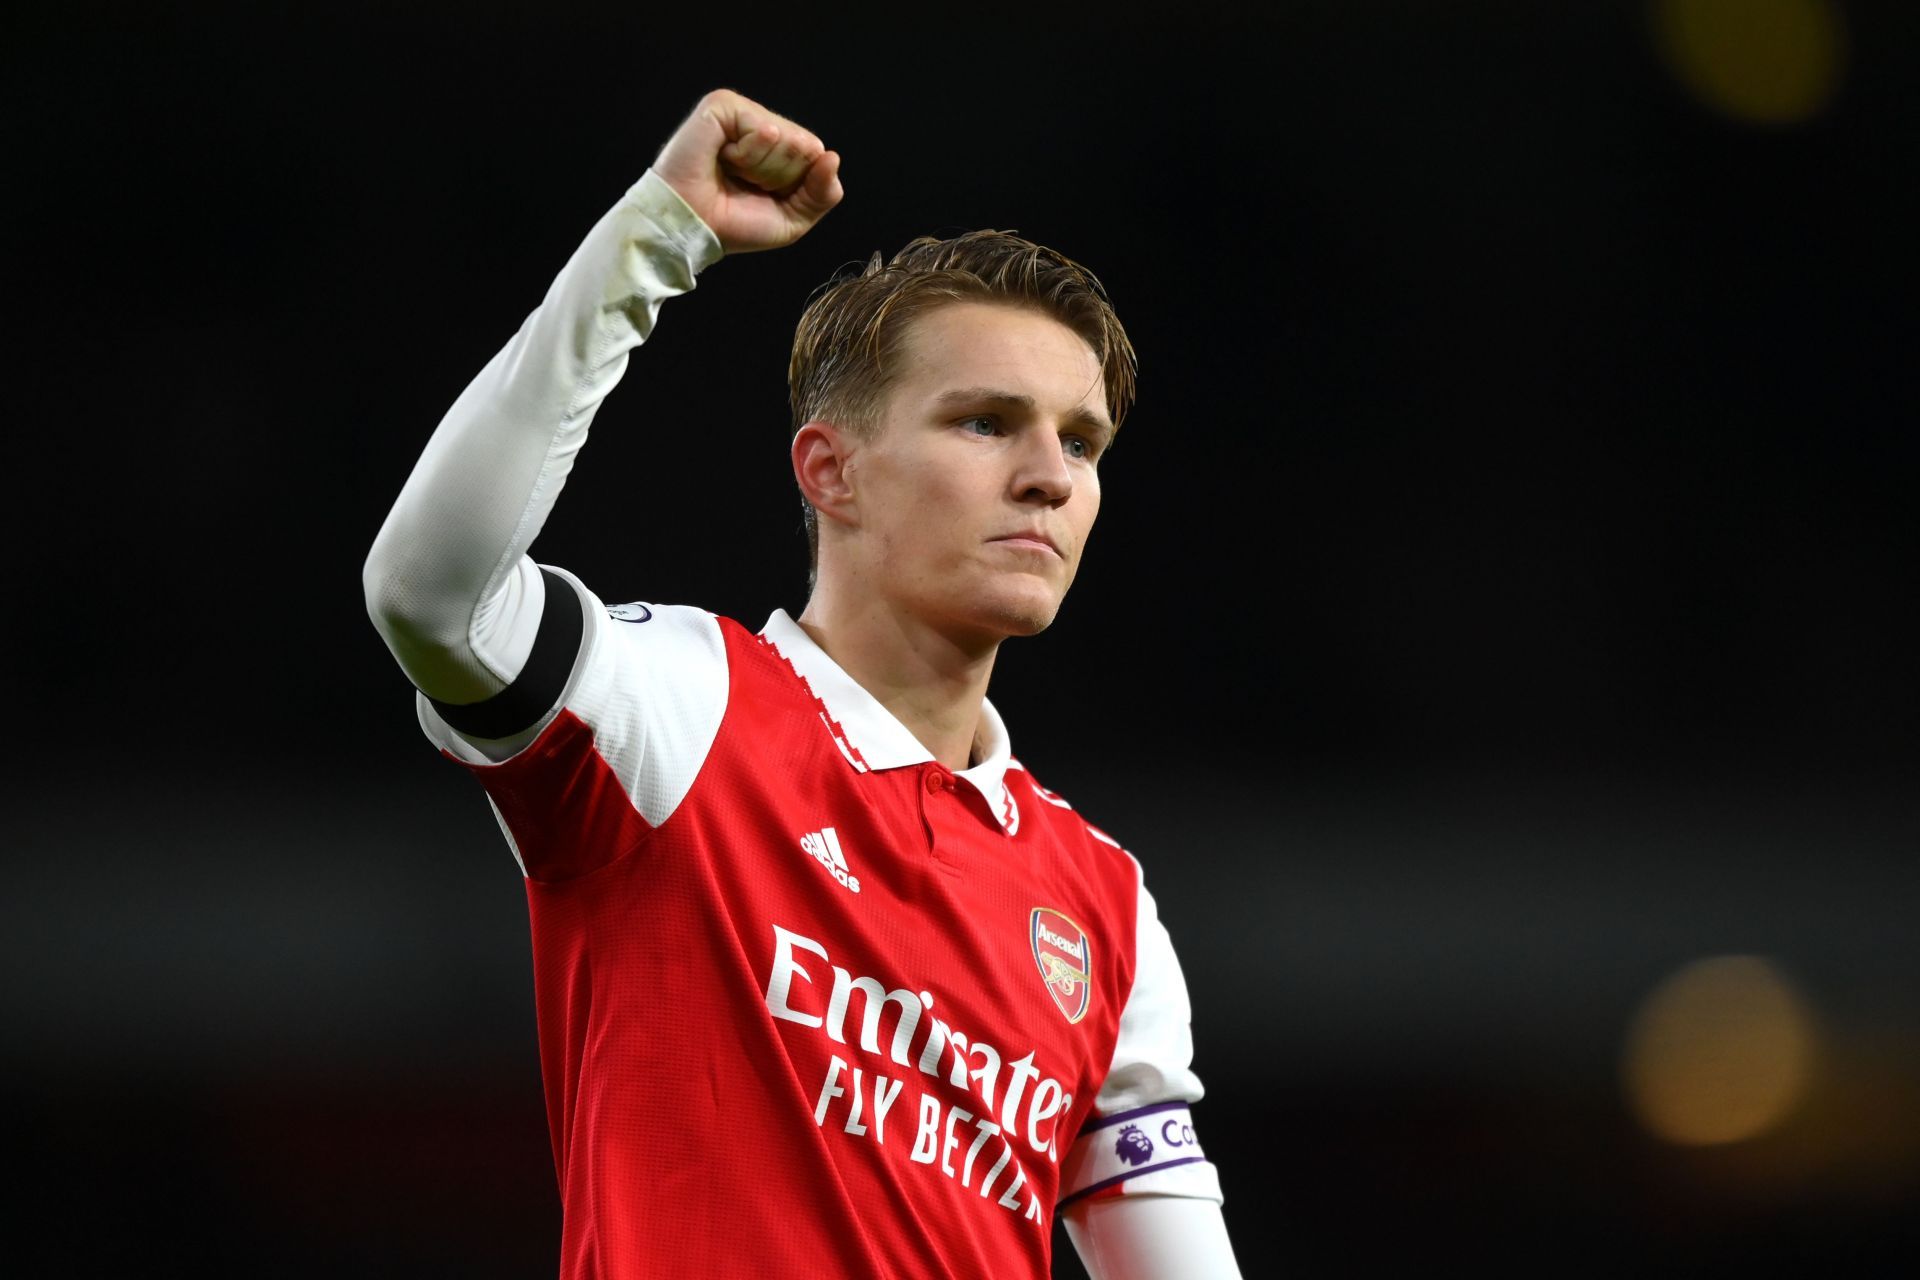 Martin Odegaard has been on a good run of form with Arsenal.